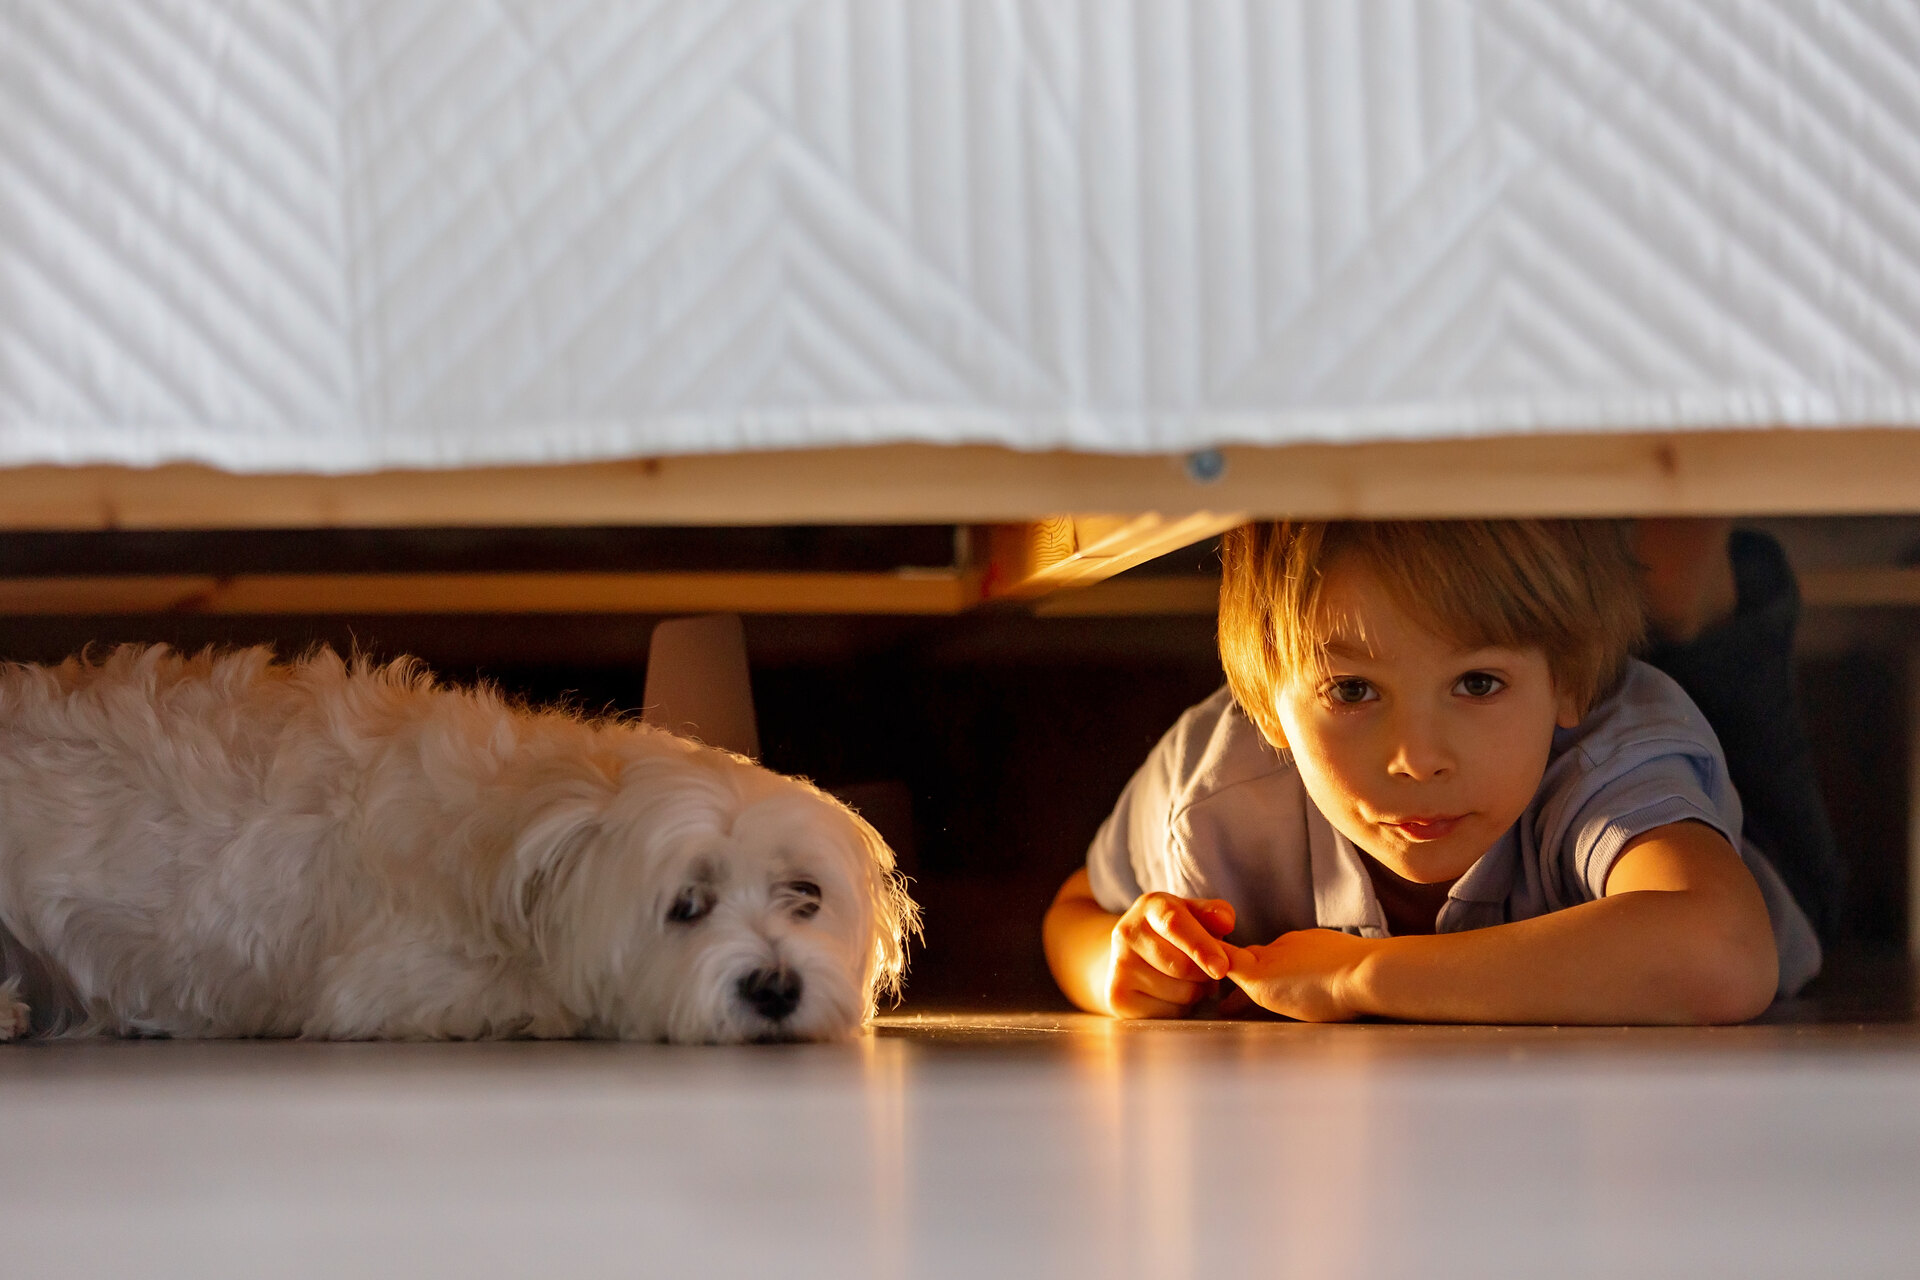 A child hiding under a bed with a dog